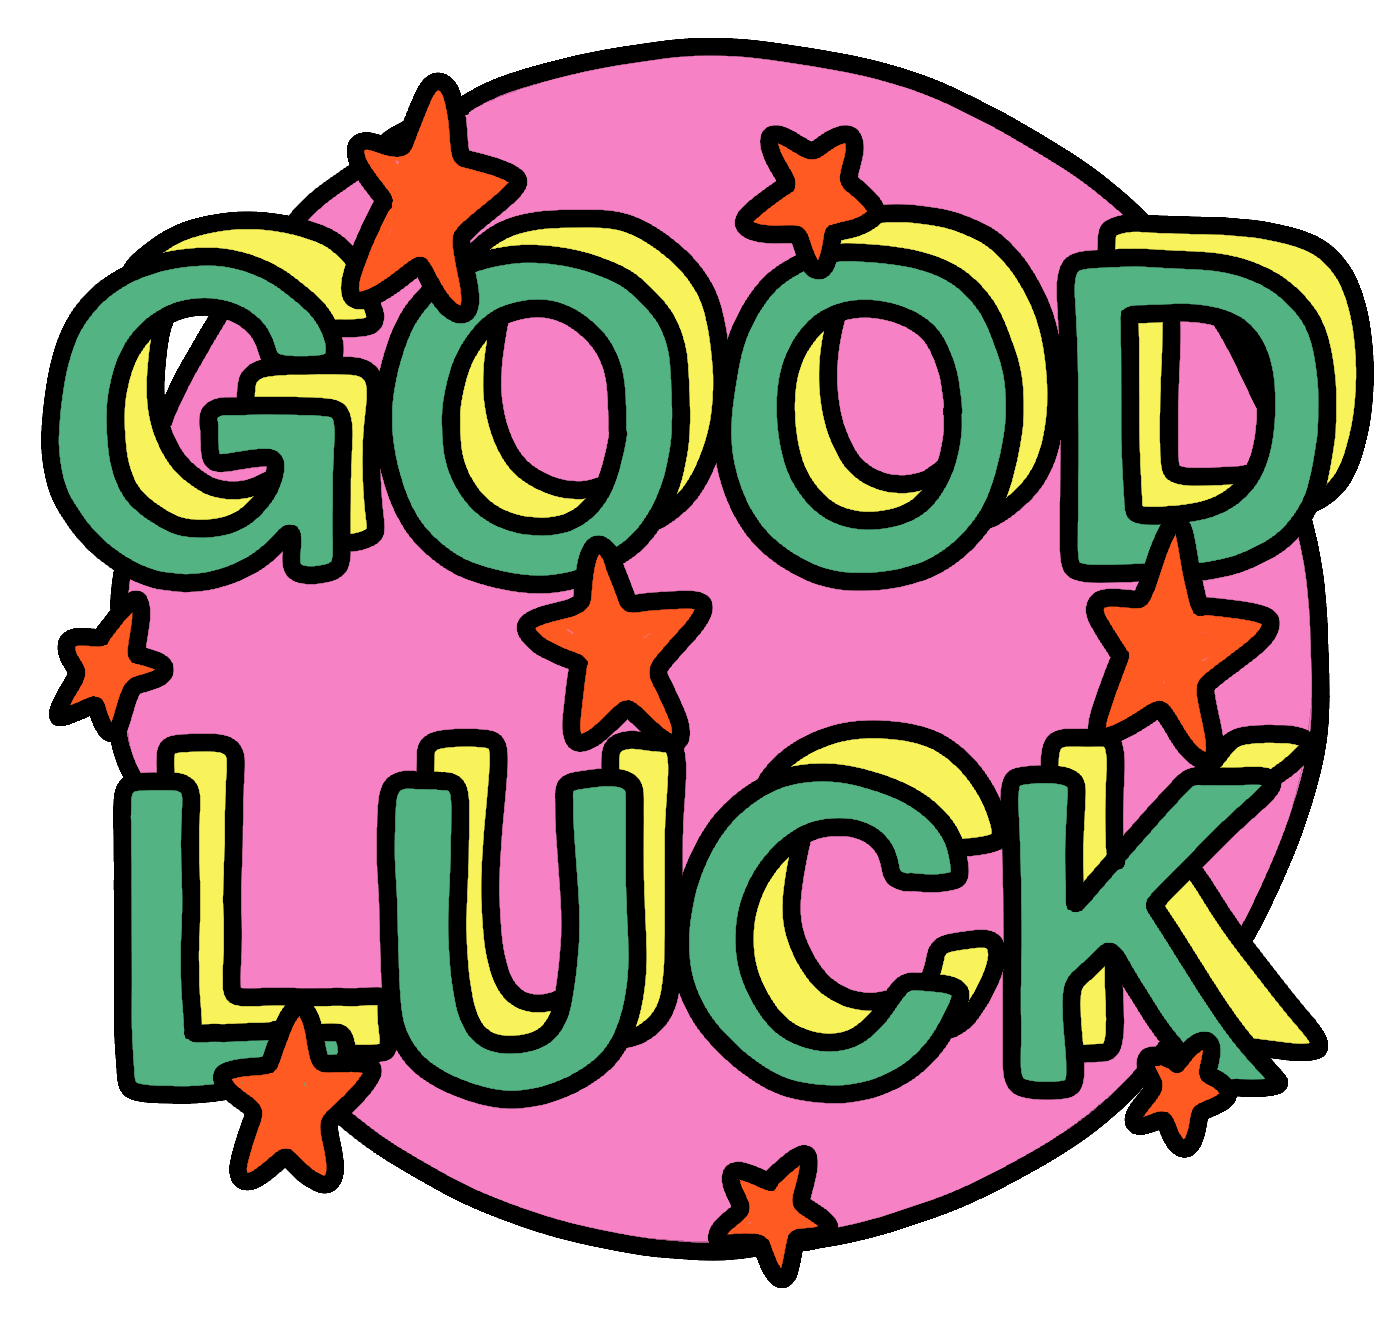 Goodluck Sticker by Poppy Deyes for iOS & Android | GIPHY